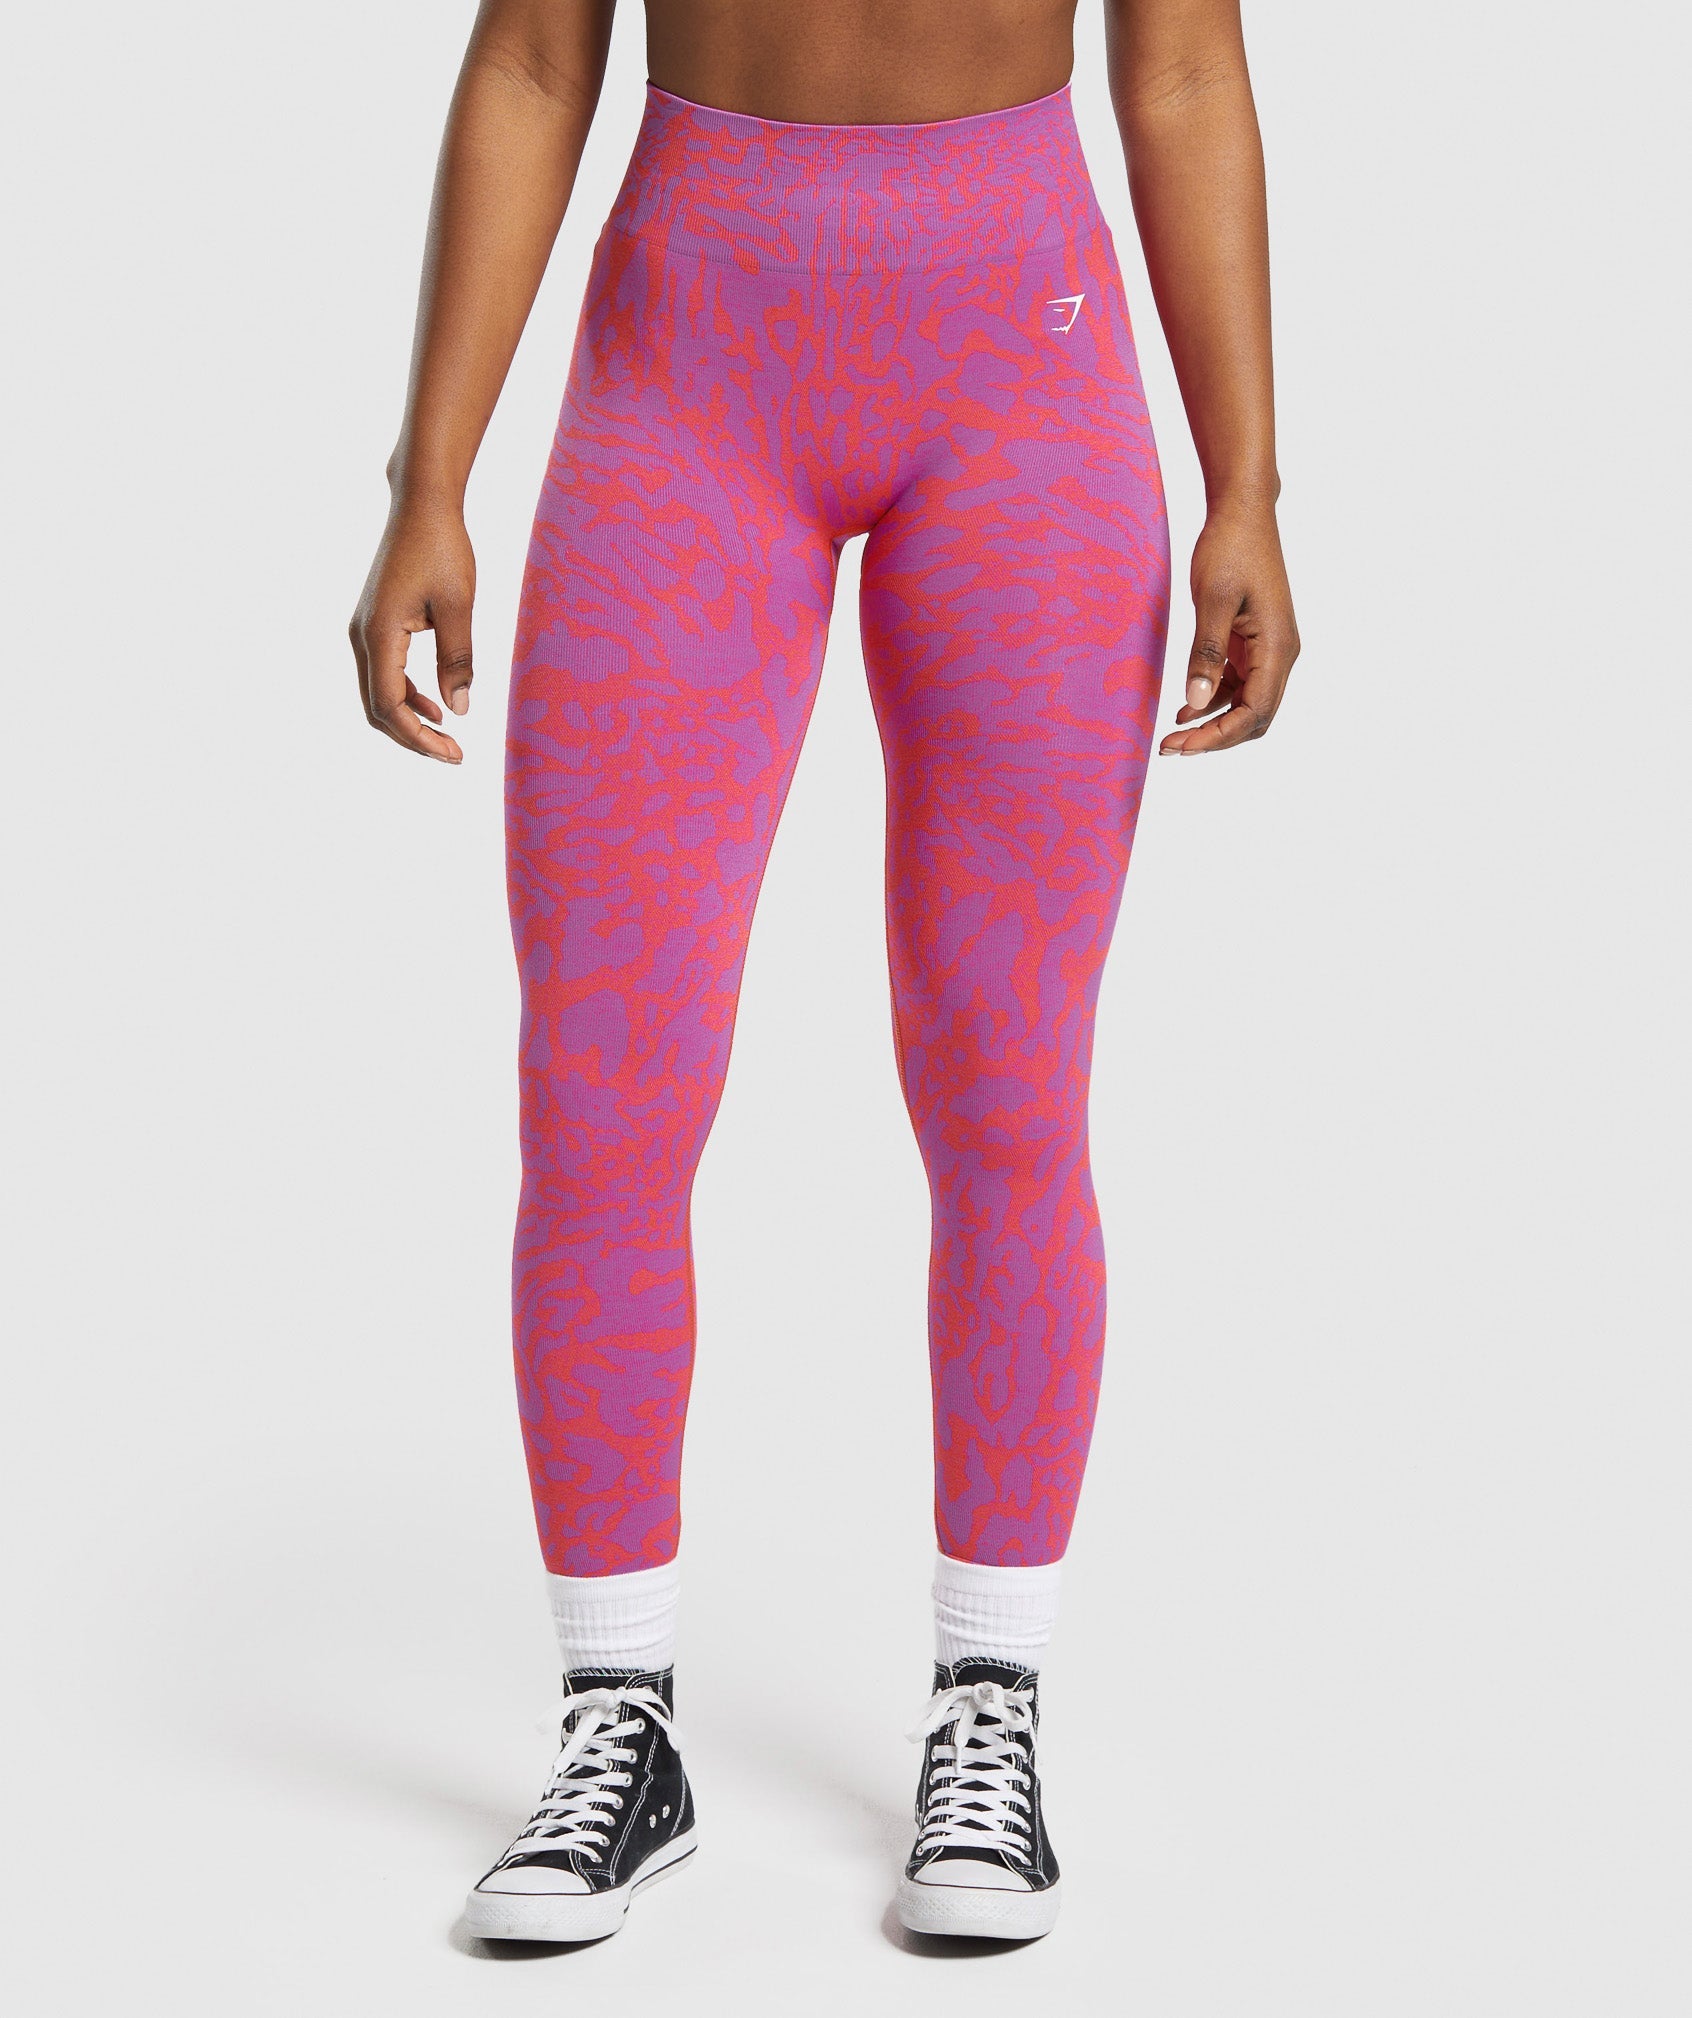 Adapt Seamless Ombre Leggings Collection - Gymshark